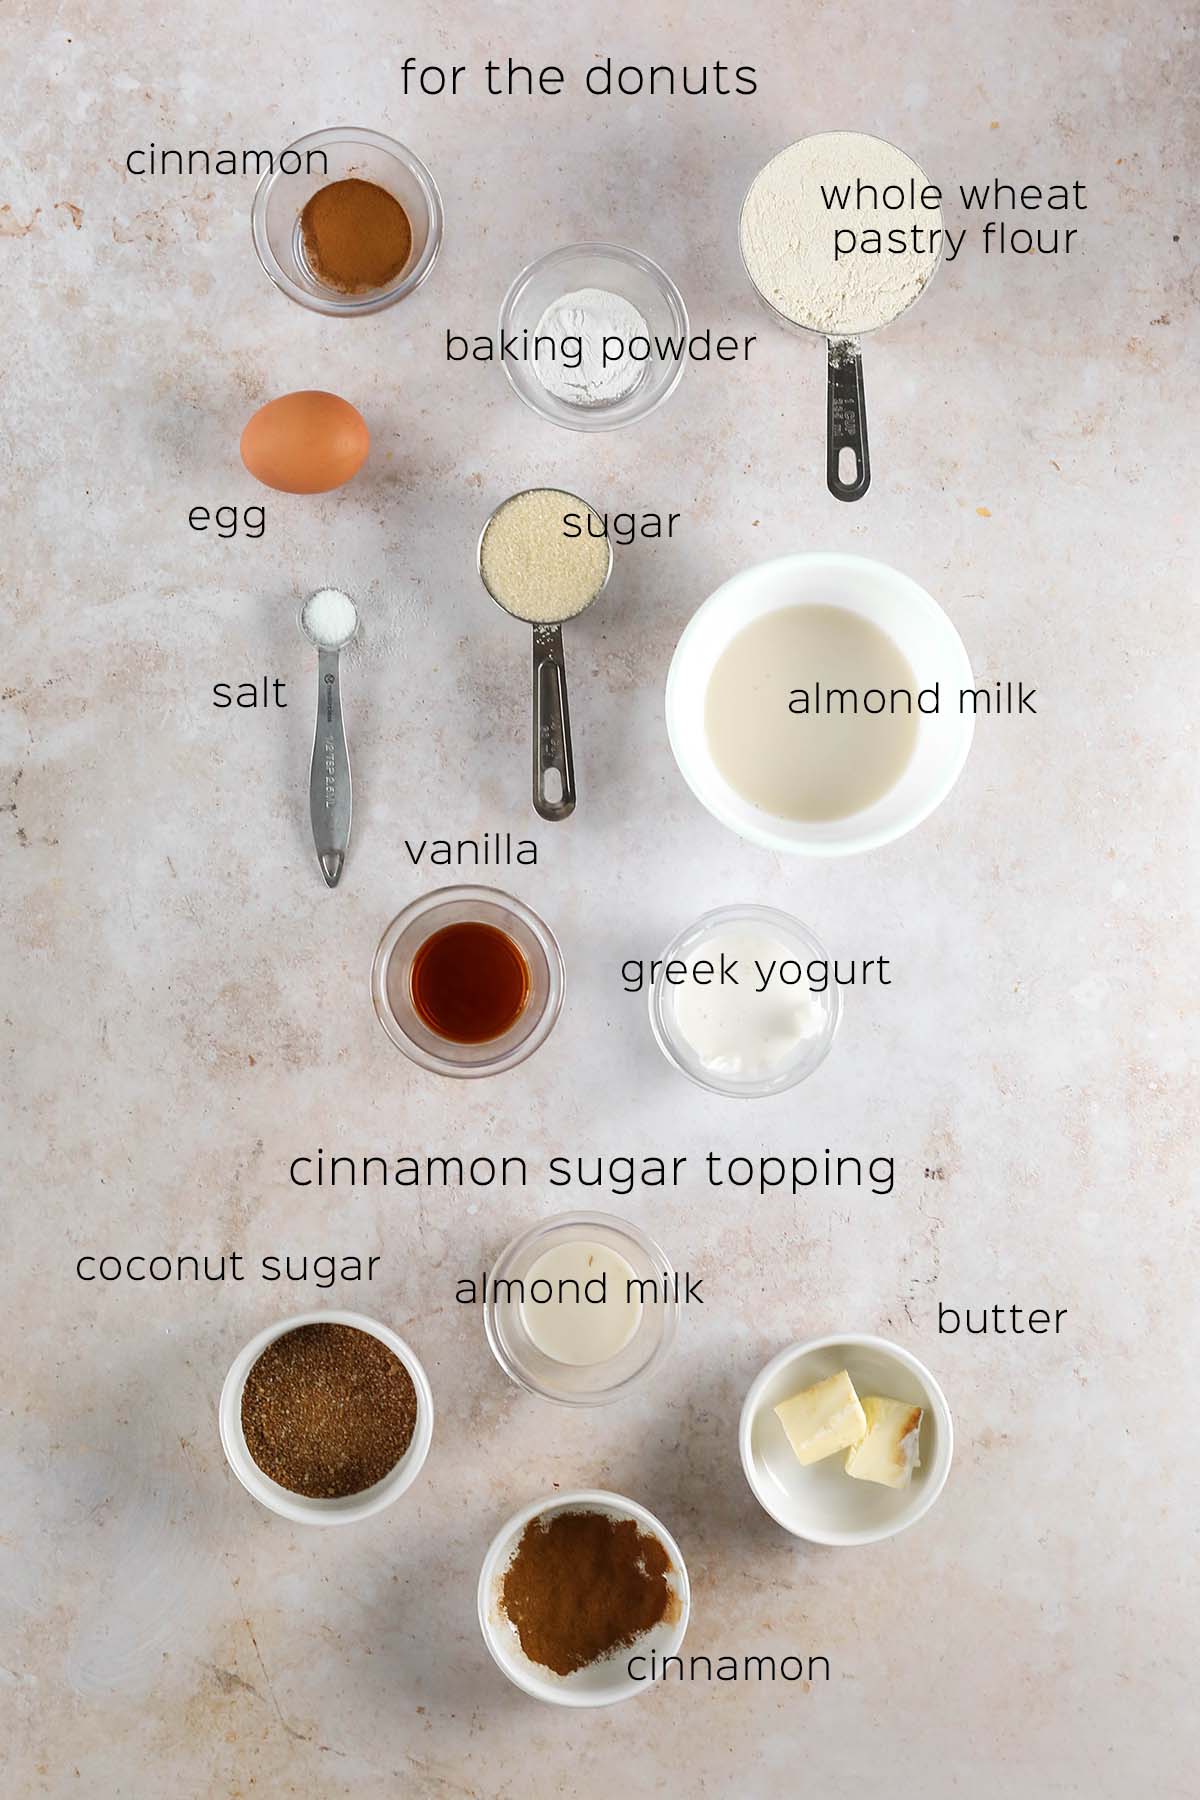 all of the ingredients needed to make the donuts and the cinnamon sugar topping, laid out on the table